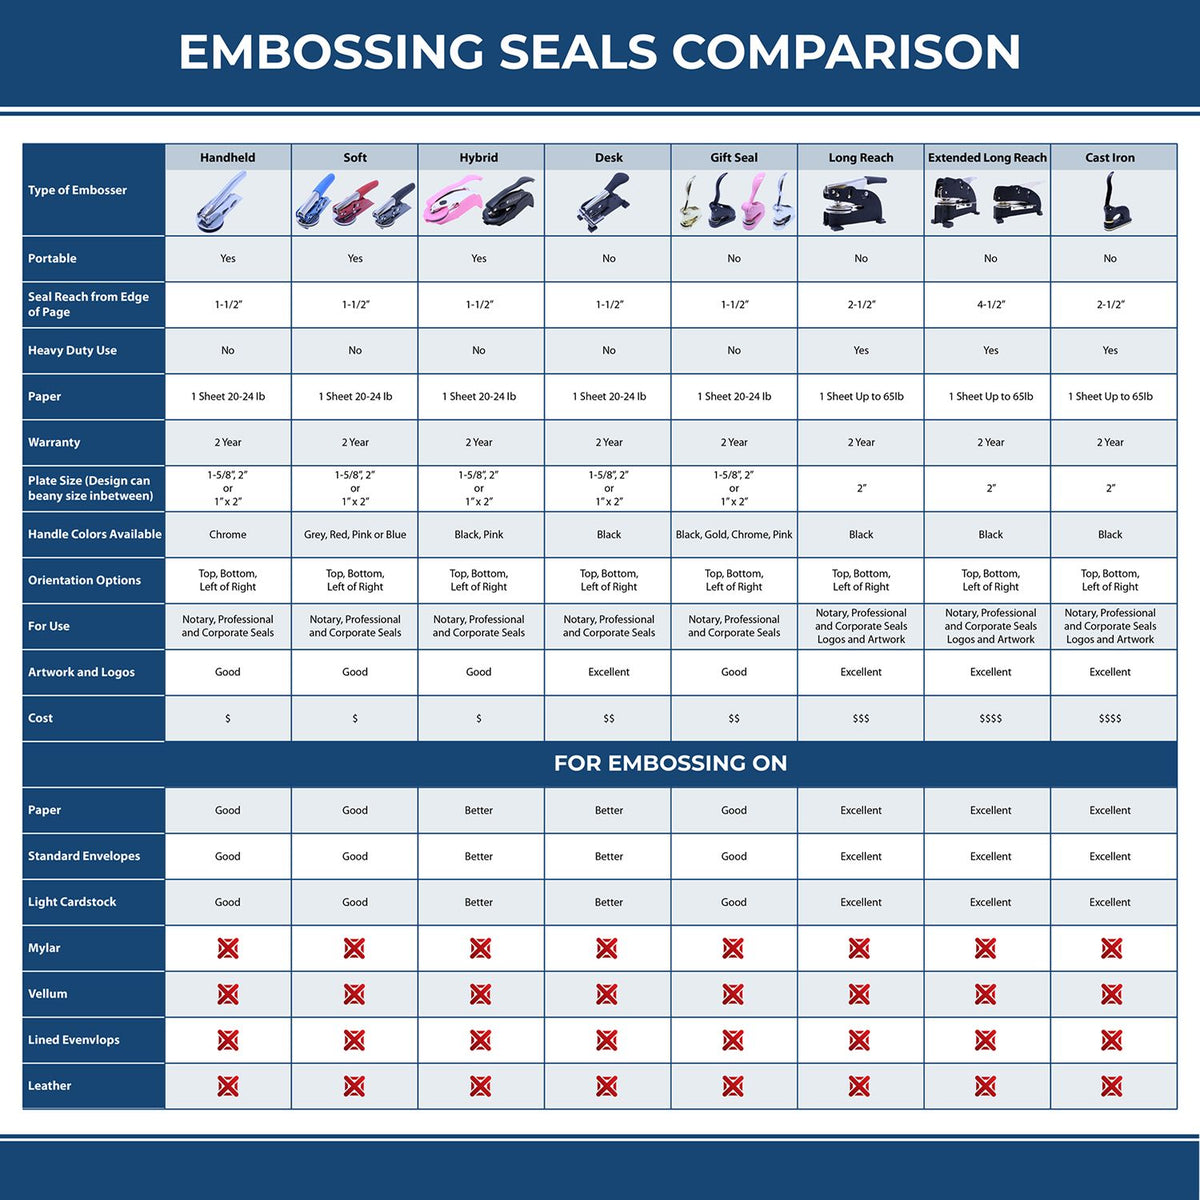 A comparison chart for the different types of mount models available for the Kansas Desk Architect Embossing Seal.